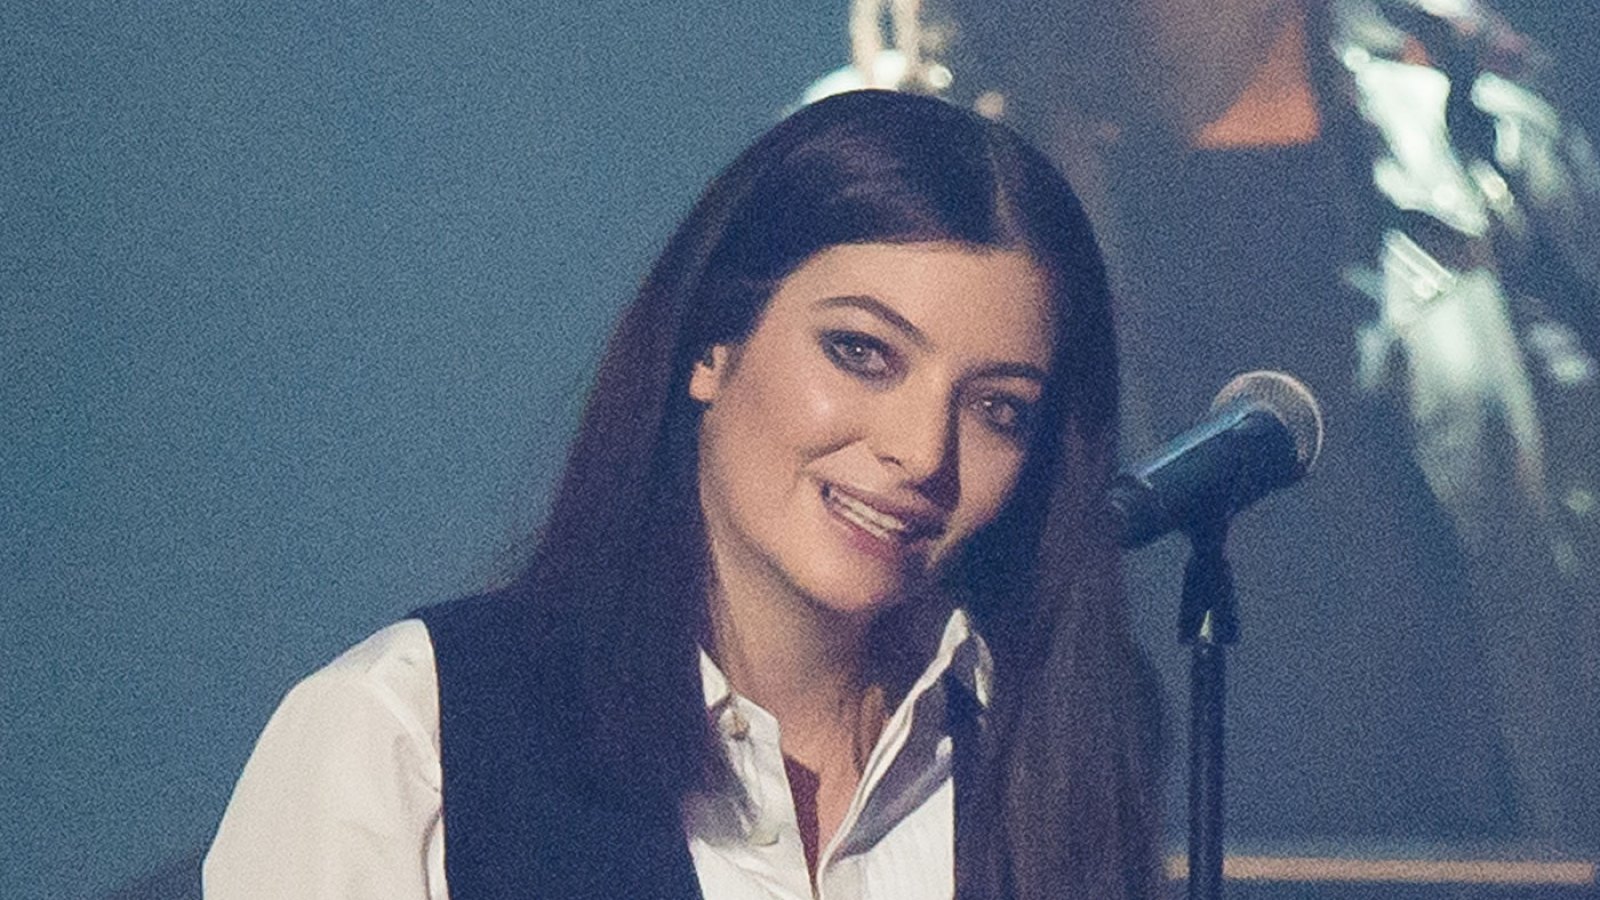 Lorde performs a tribute of David Bowie live on stage at the BRIT Awards 2016